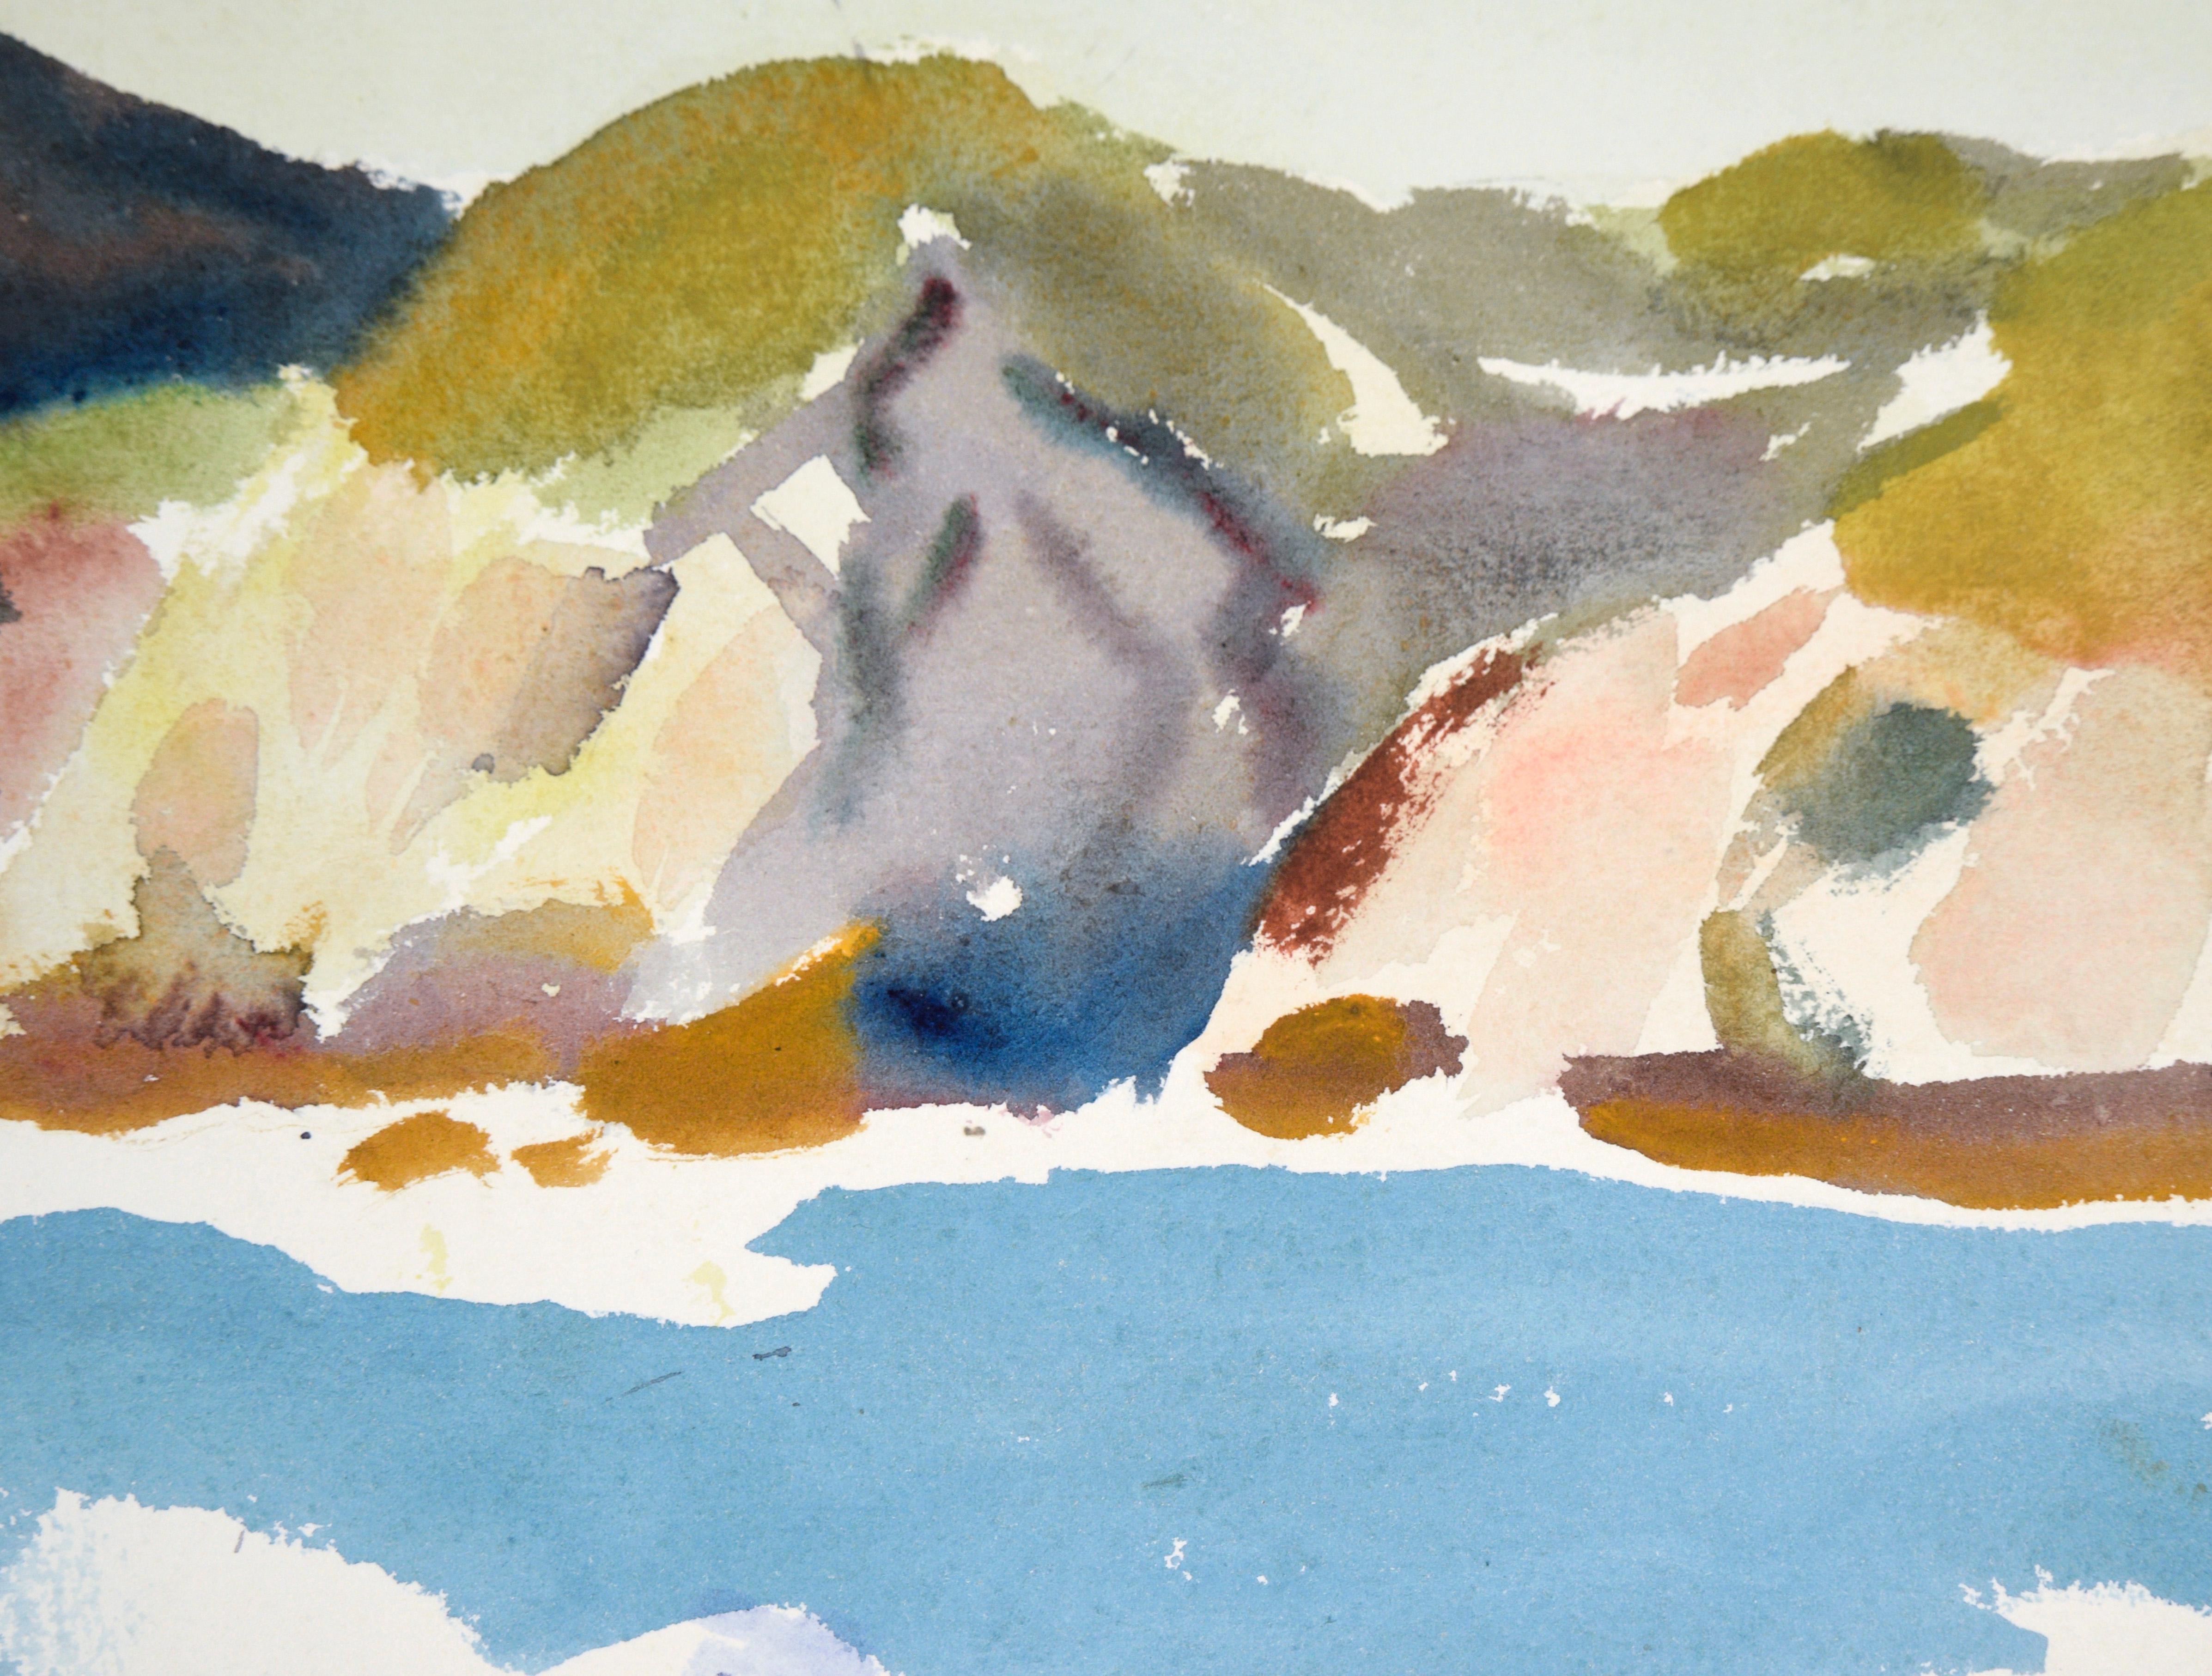 Big Sur Coast Landscape in Watercolor on Paper

Serene coastal landscape by notable artist Paul Dougherty (American, 1877-1947). The viewer looks out over the ocean, along the coastline. There are large, sloping cliffs leading from yellow-green tops